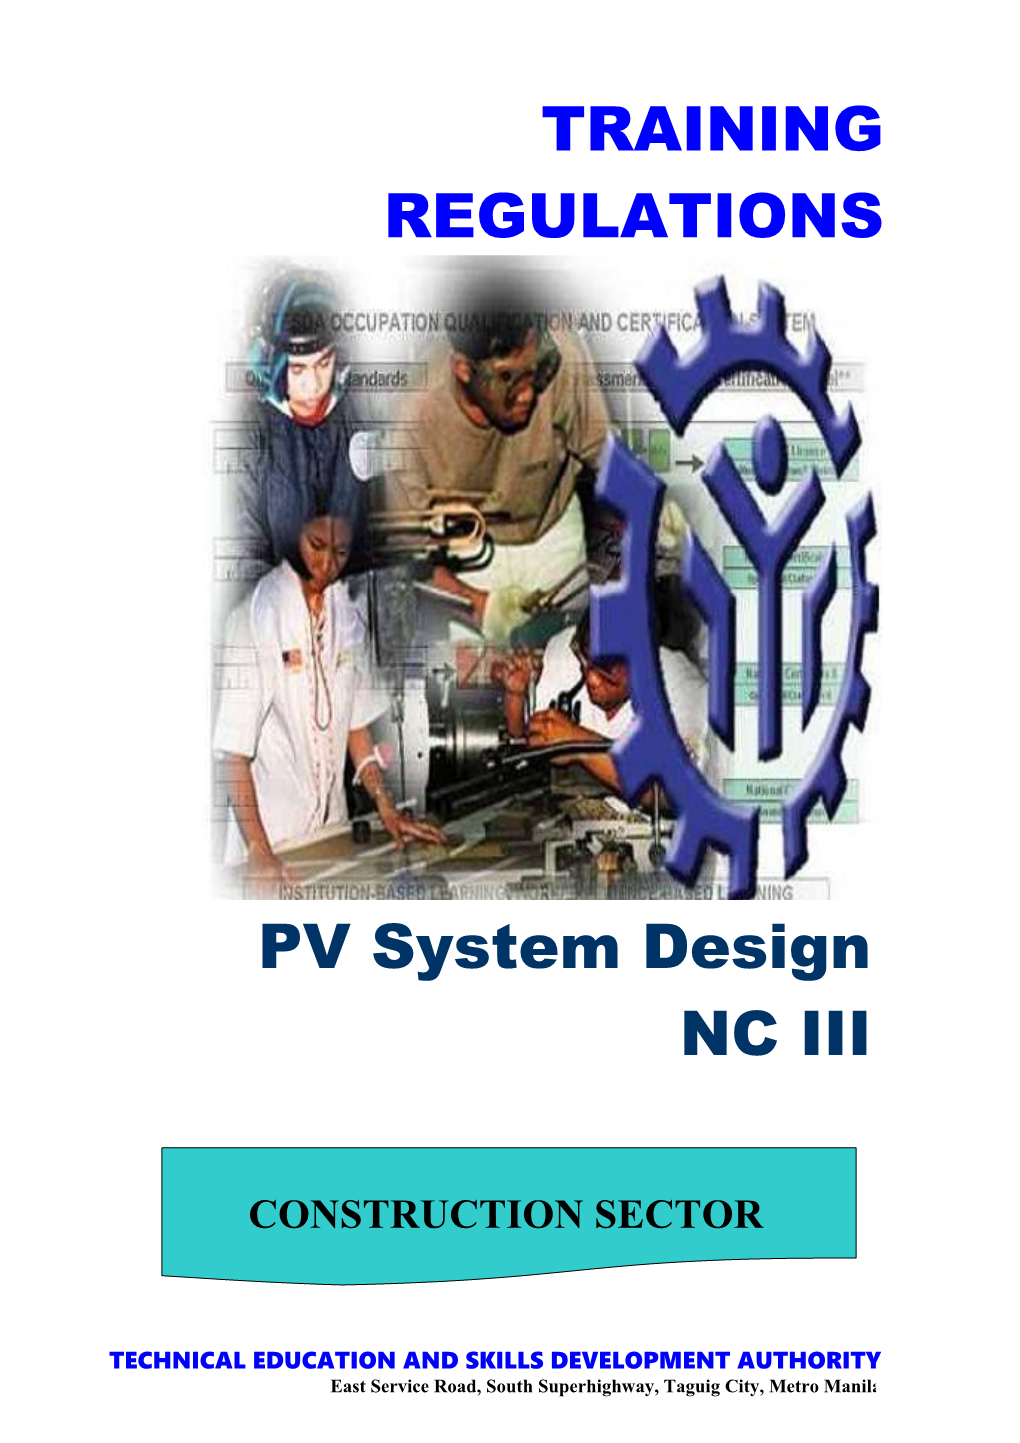 Construction - Electrical Sub-Sector